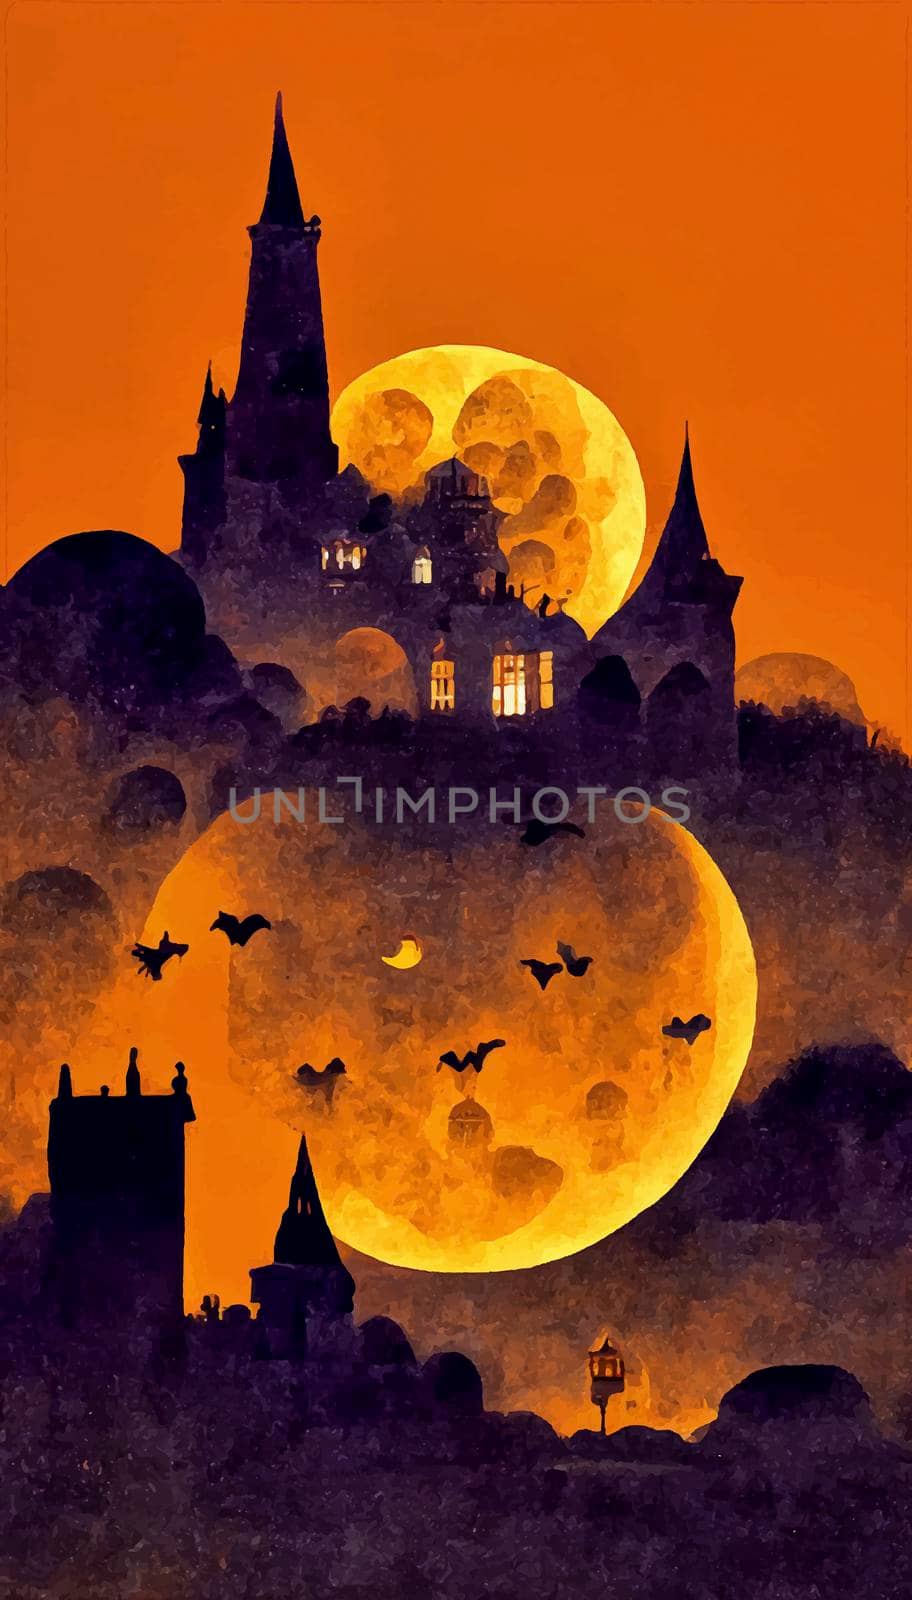 halloween night illustration with full moon and castle in the background. halloween illustration by JpRamos